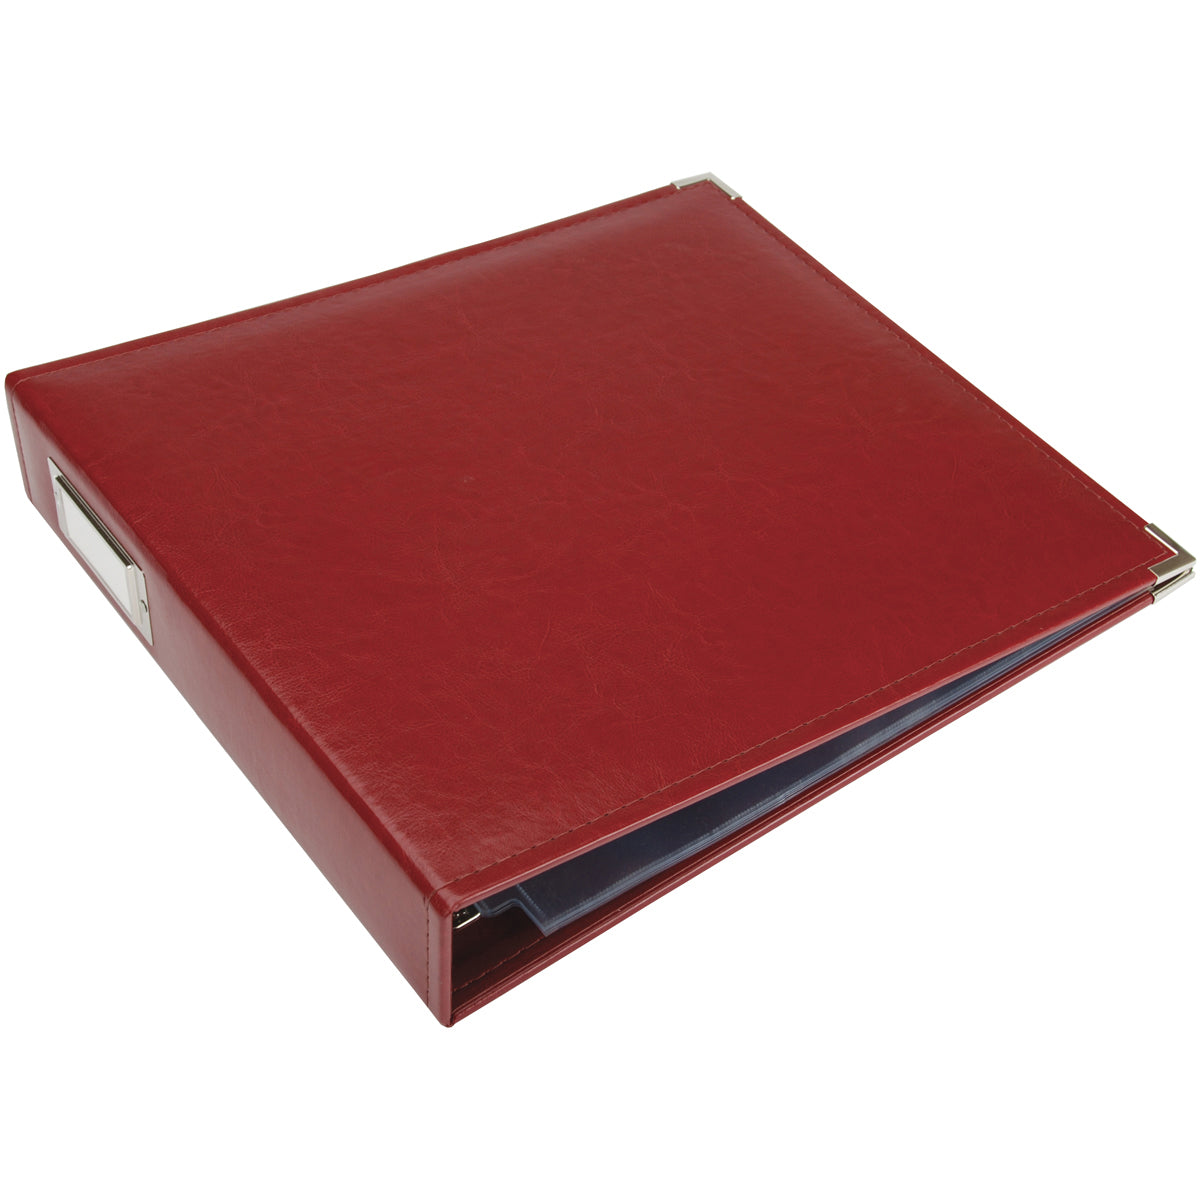 Charles River Leather Loose-Leaf 3-Ring-bound Album - 10.5 x 12